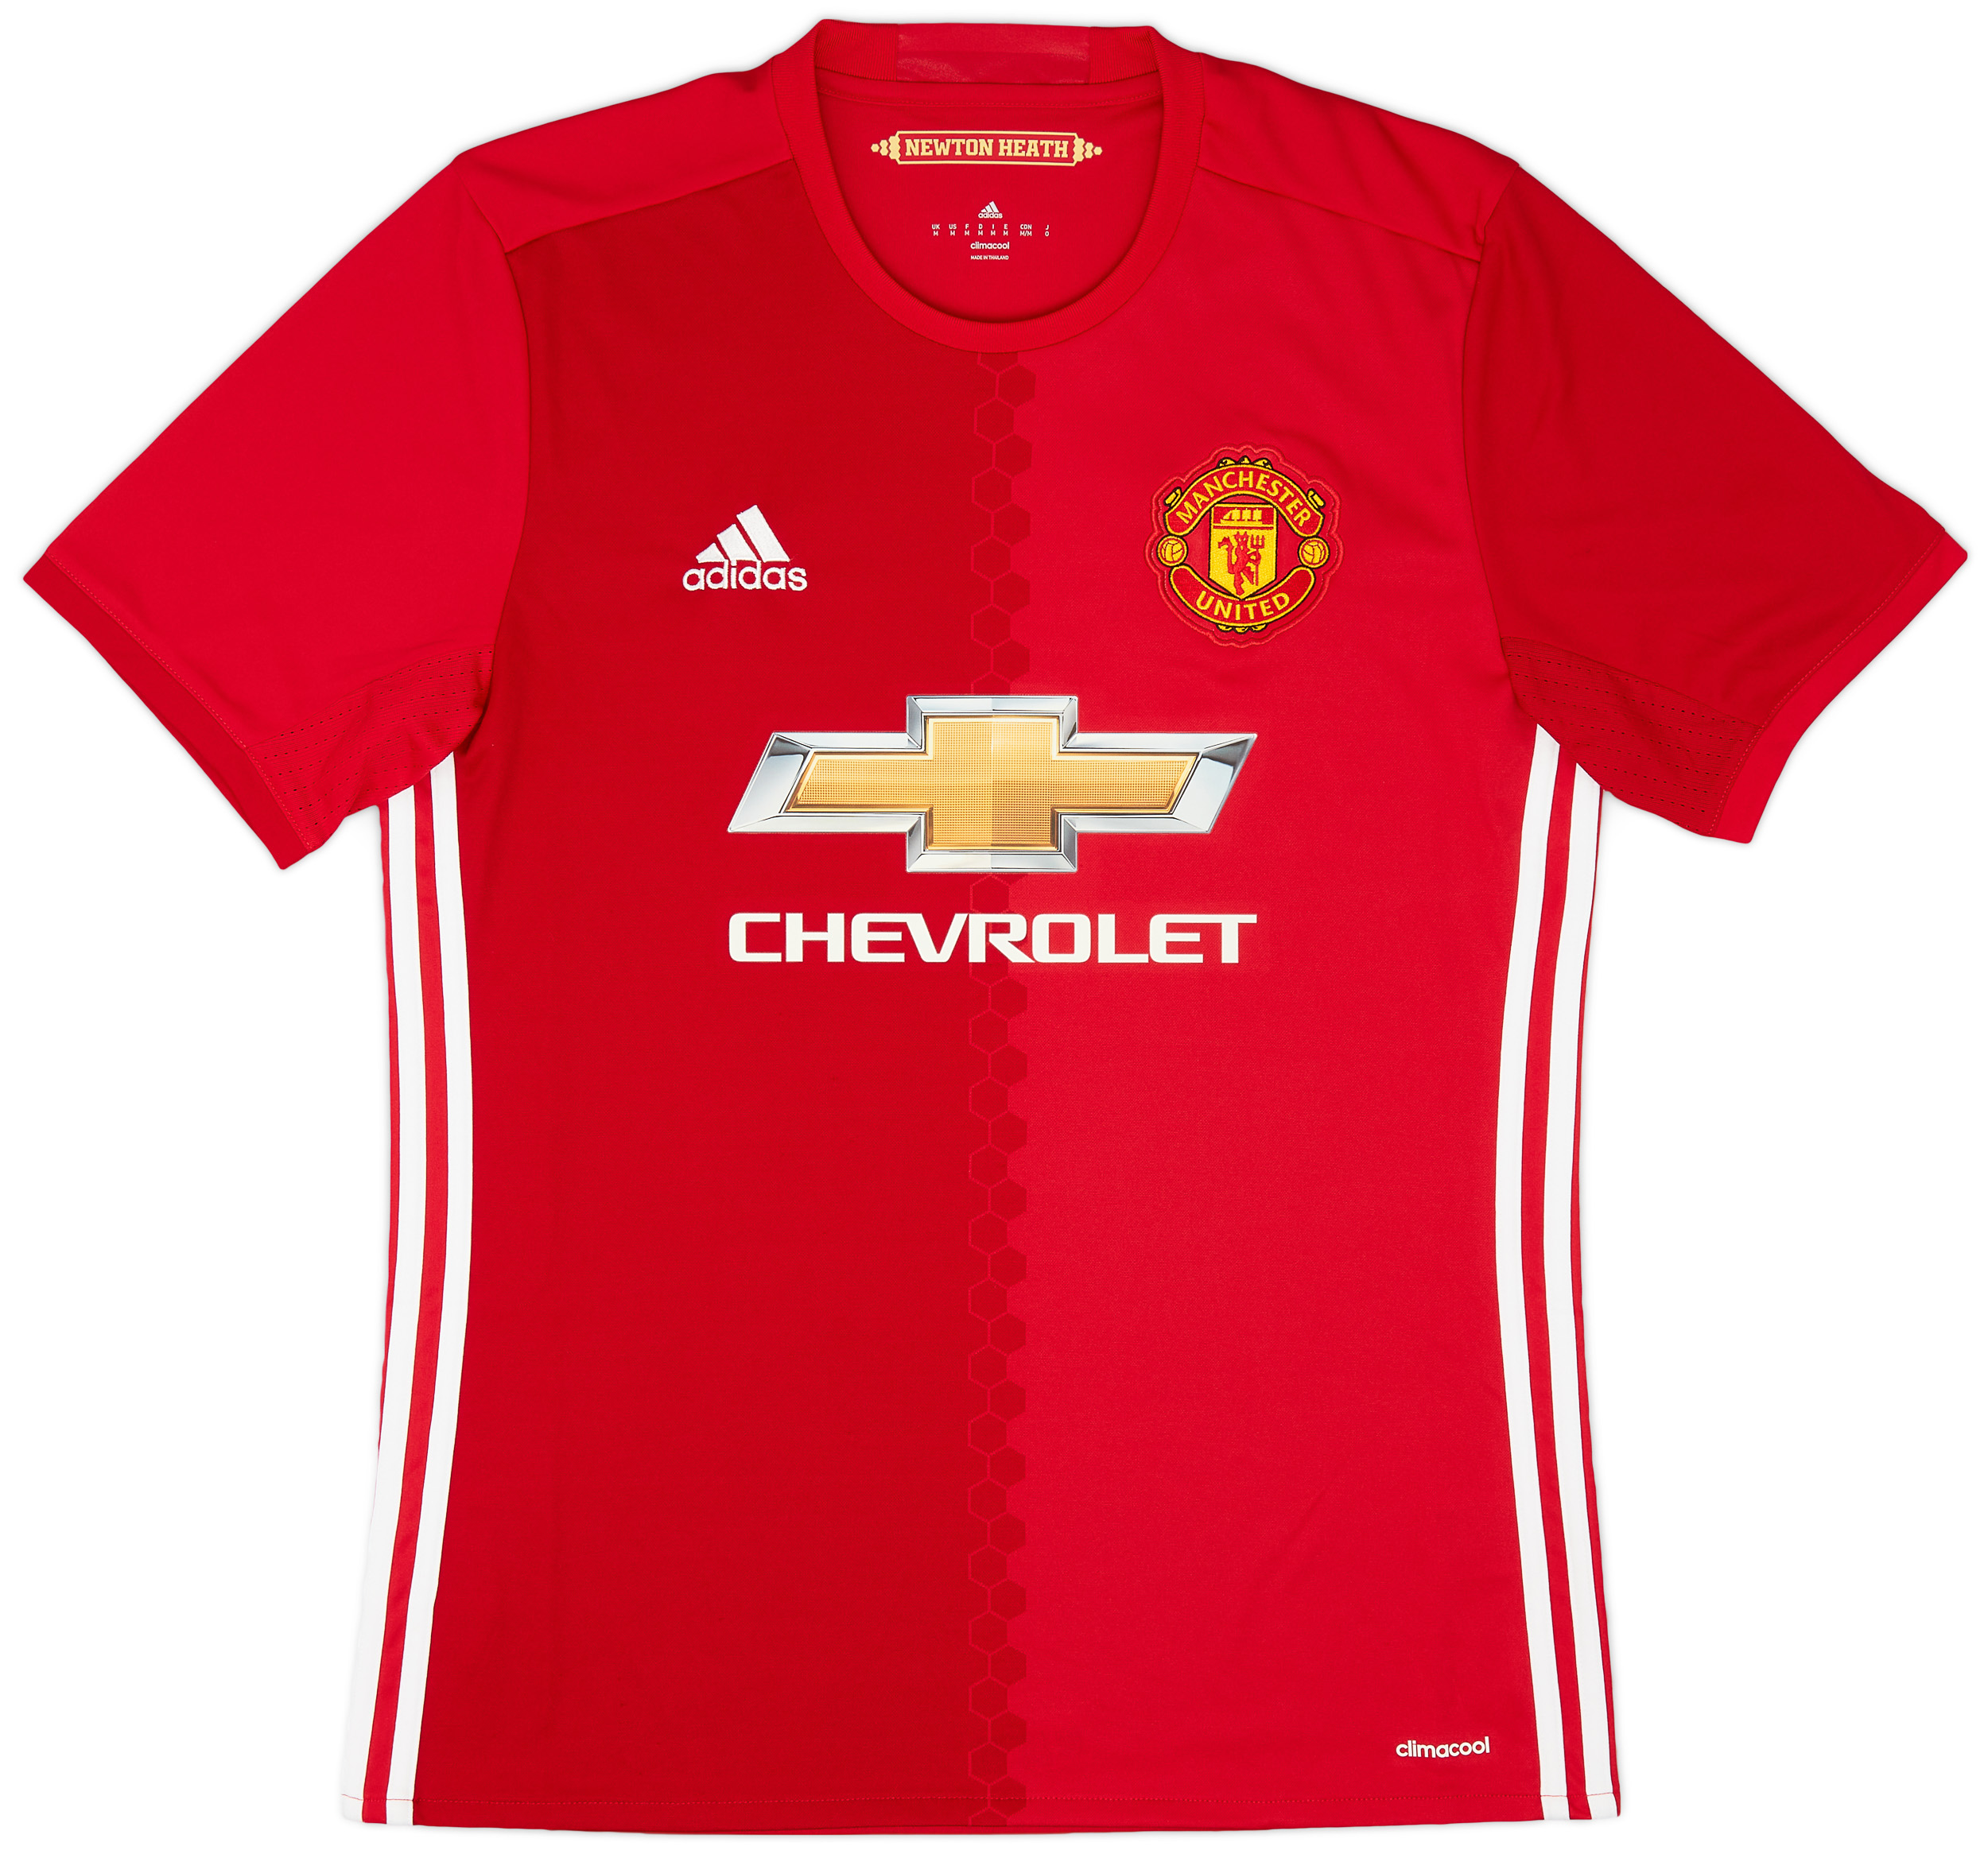 2016-17 Manchester United Home Shirt - 9/10 - ()